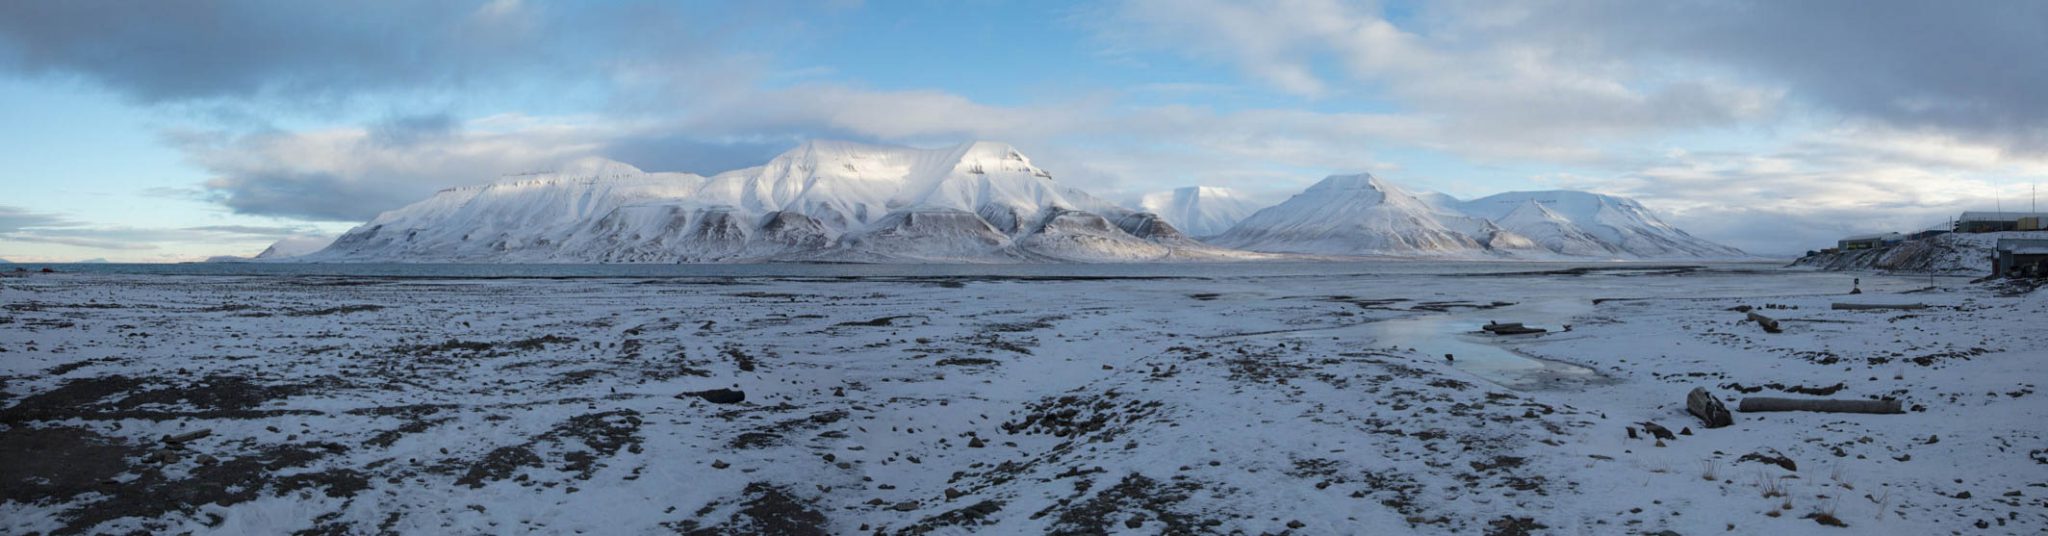 Image from Svalbard in Norway. A snowy plain with black rocks showing through is in the foreground and there's a snowy mountain range in the background.